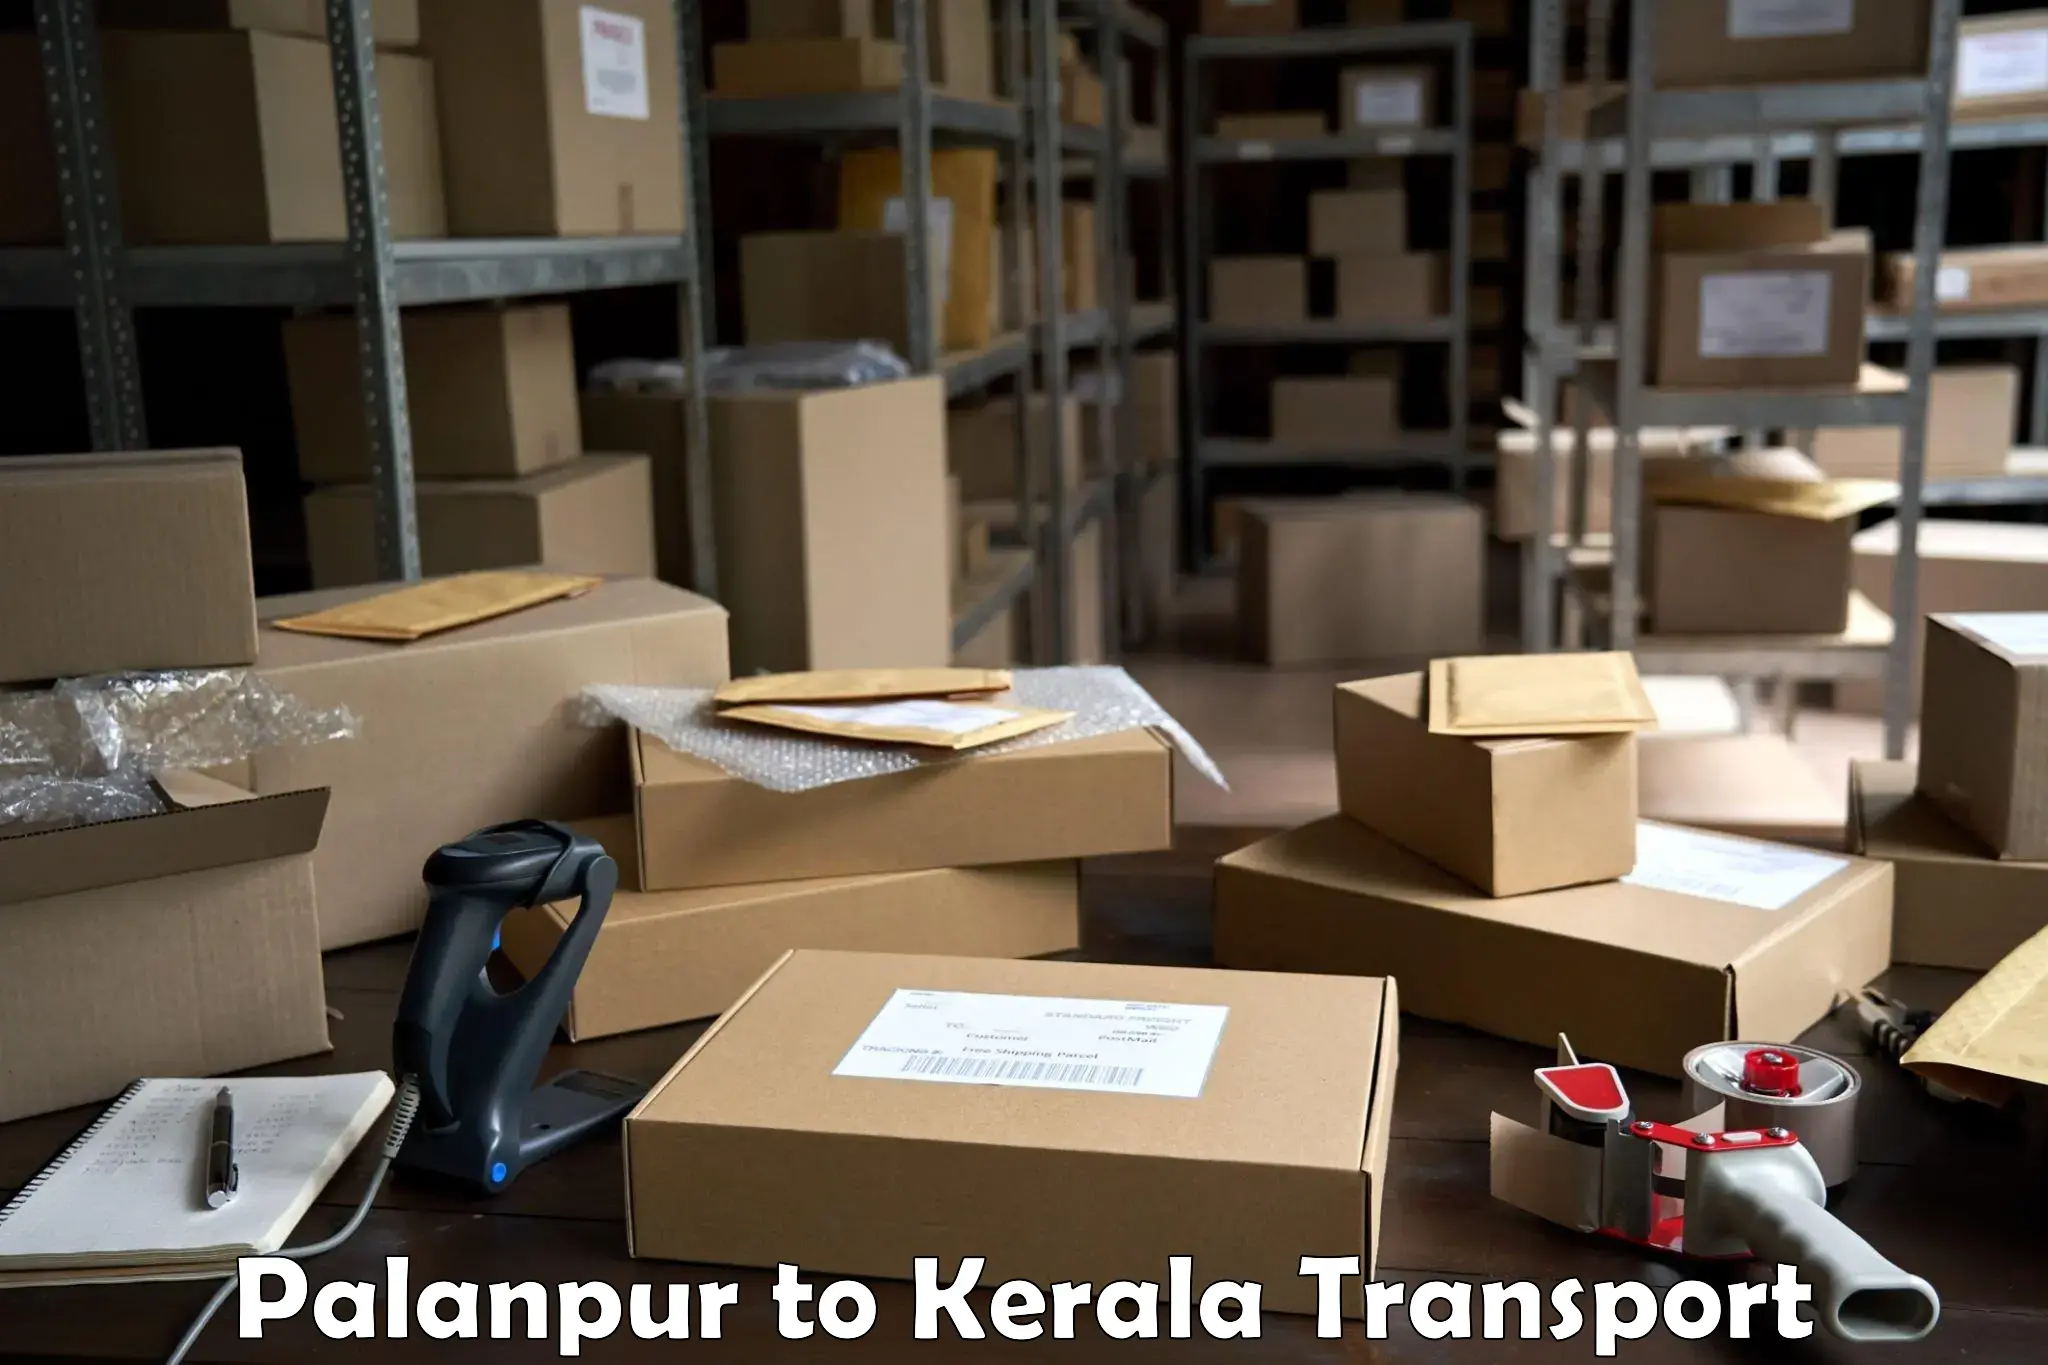 Road transport online services Palanpur to Ernakulam